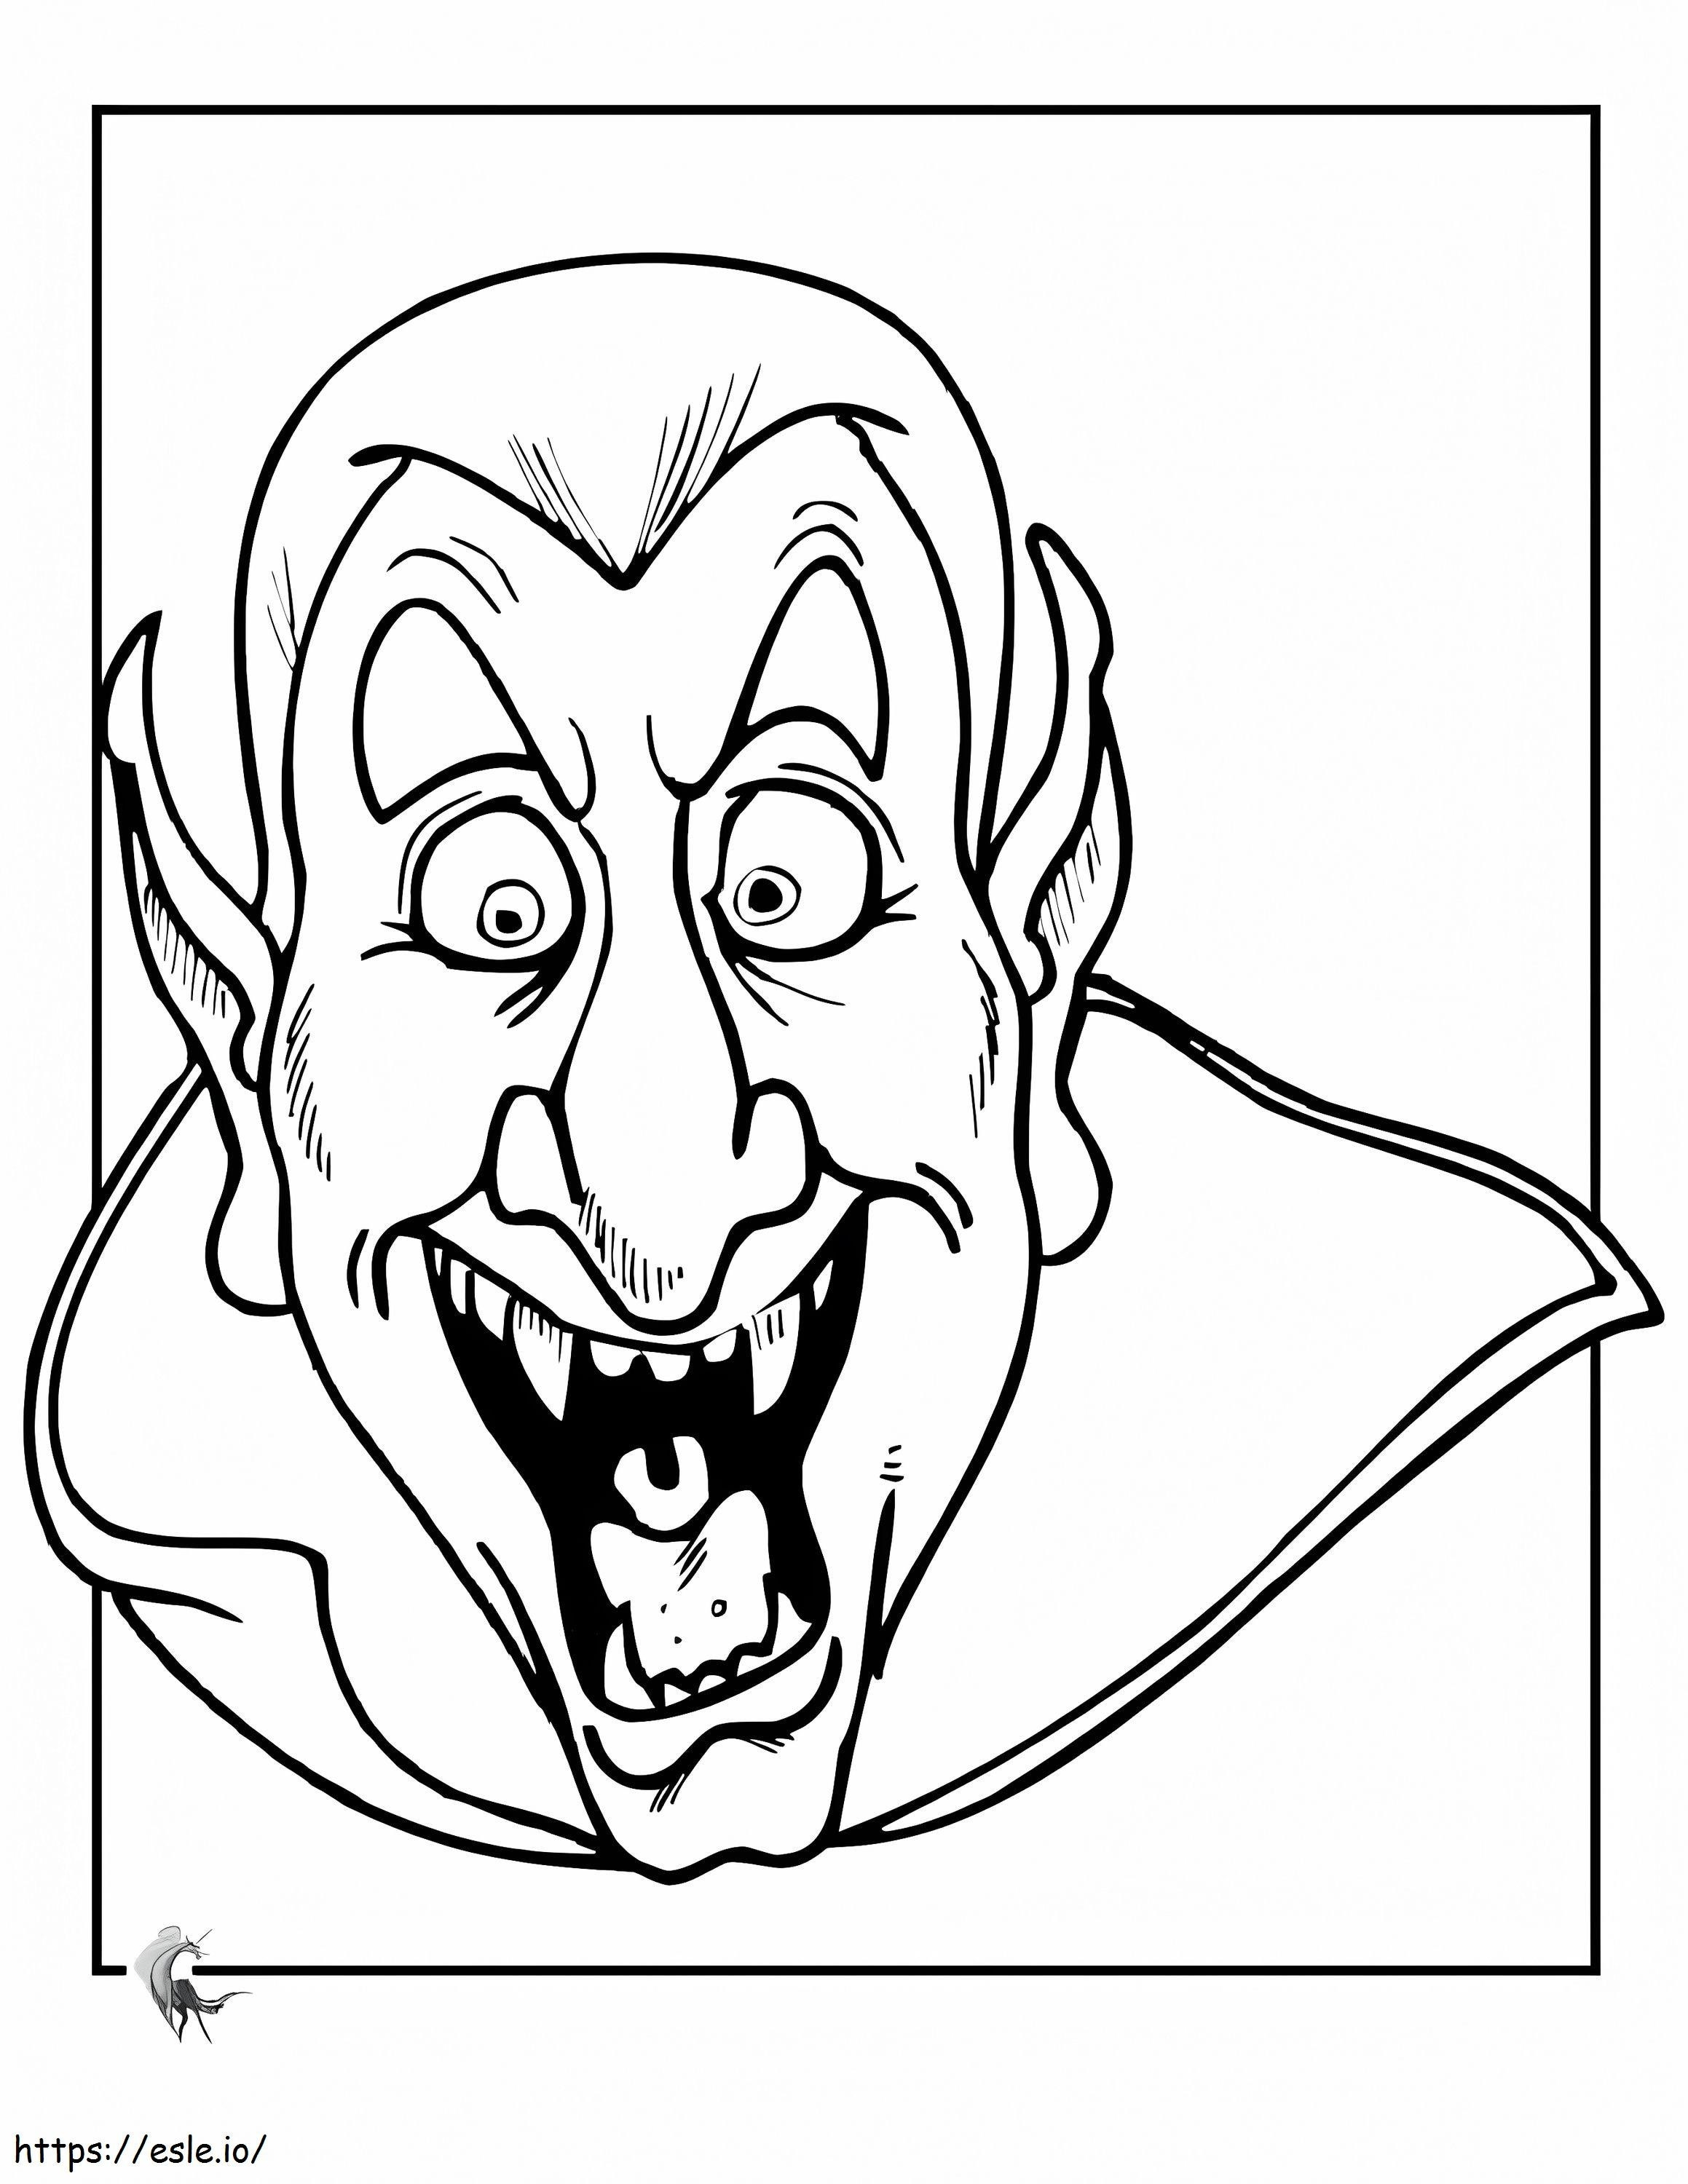 Halloween Dracula coloring page